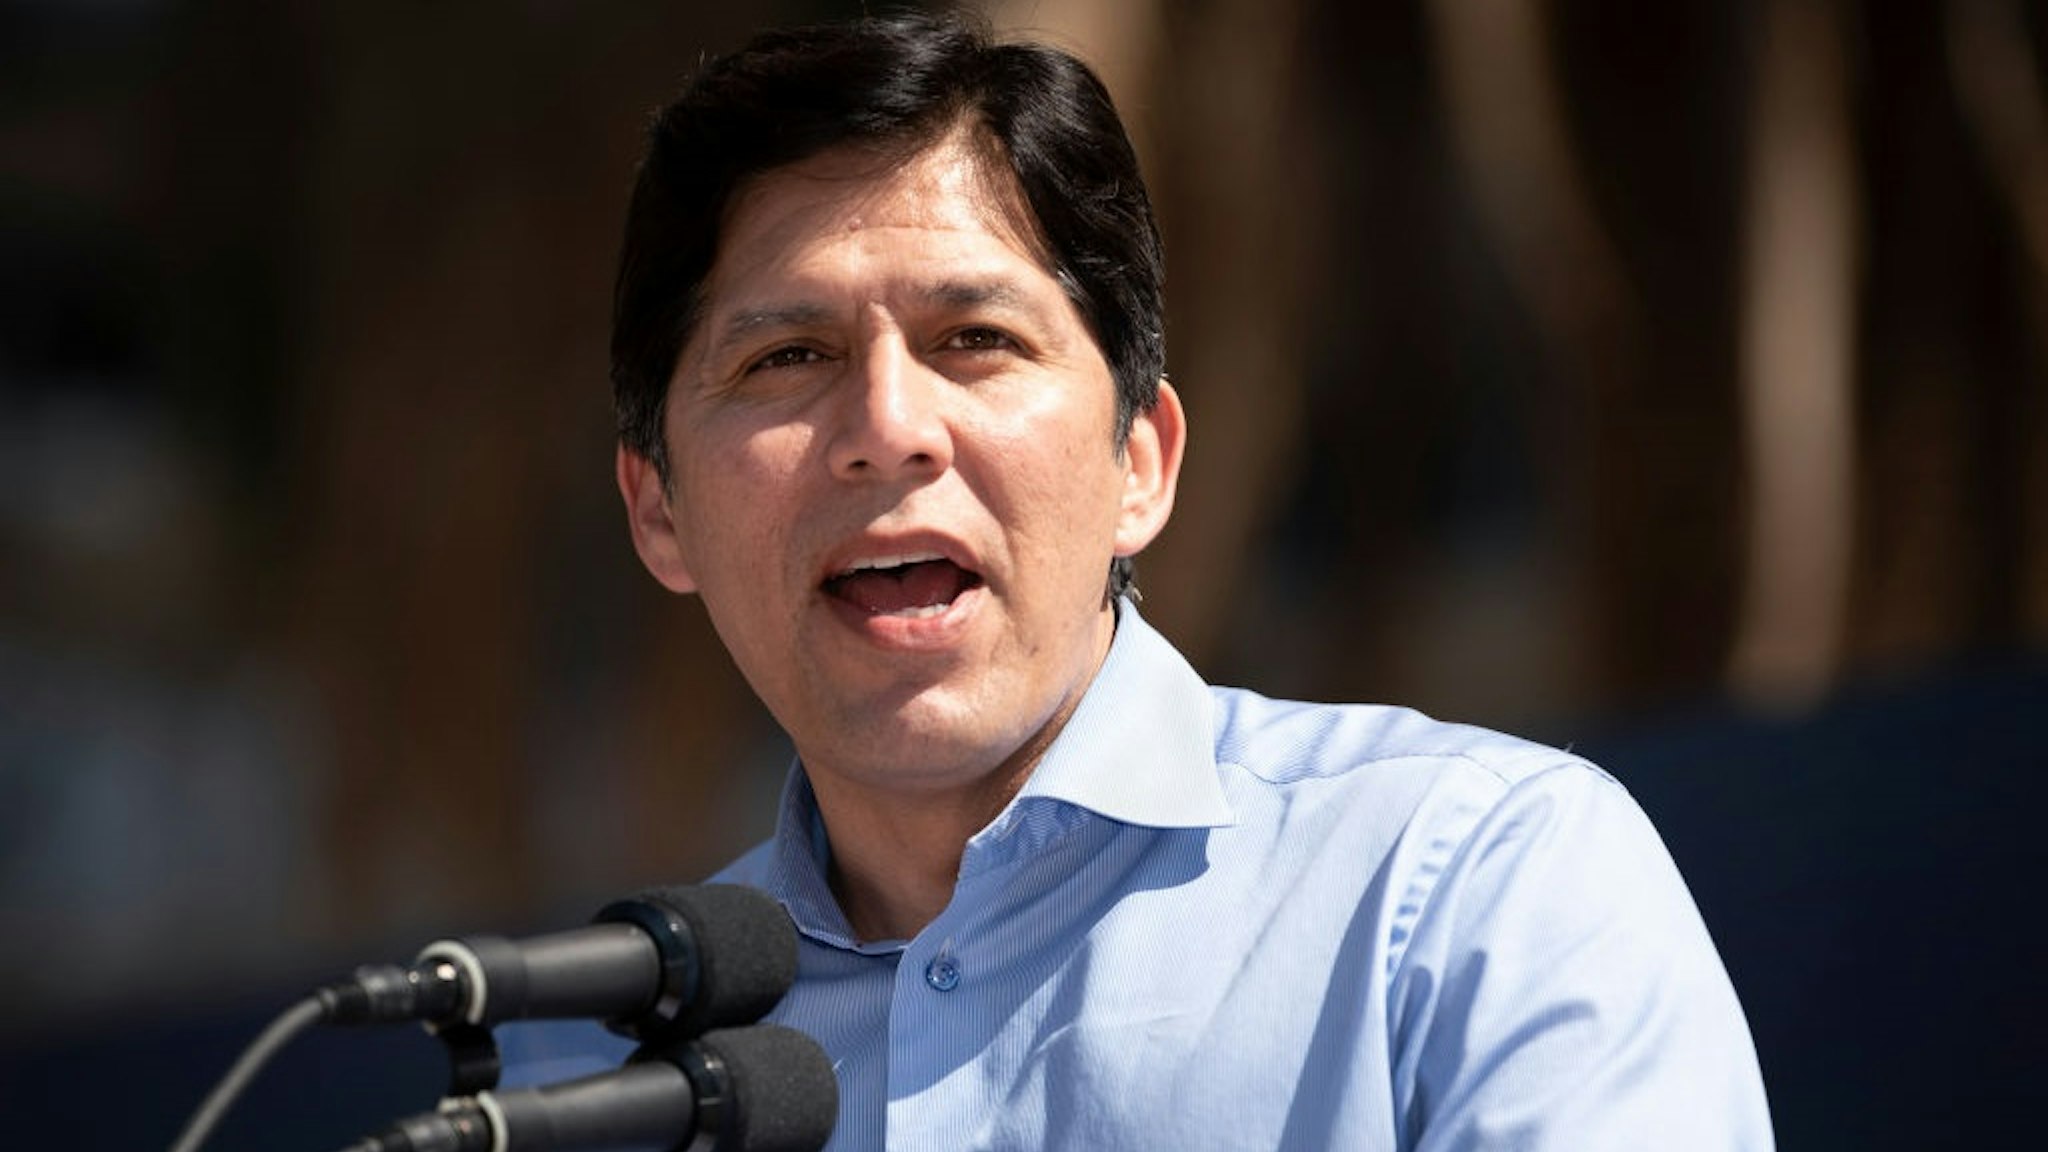 California Democratic State Senator, Kevin De Leon, speaks at the March for Science in Los Angeles, California on April 14, 2018.